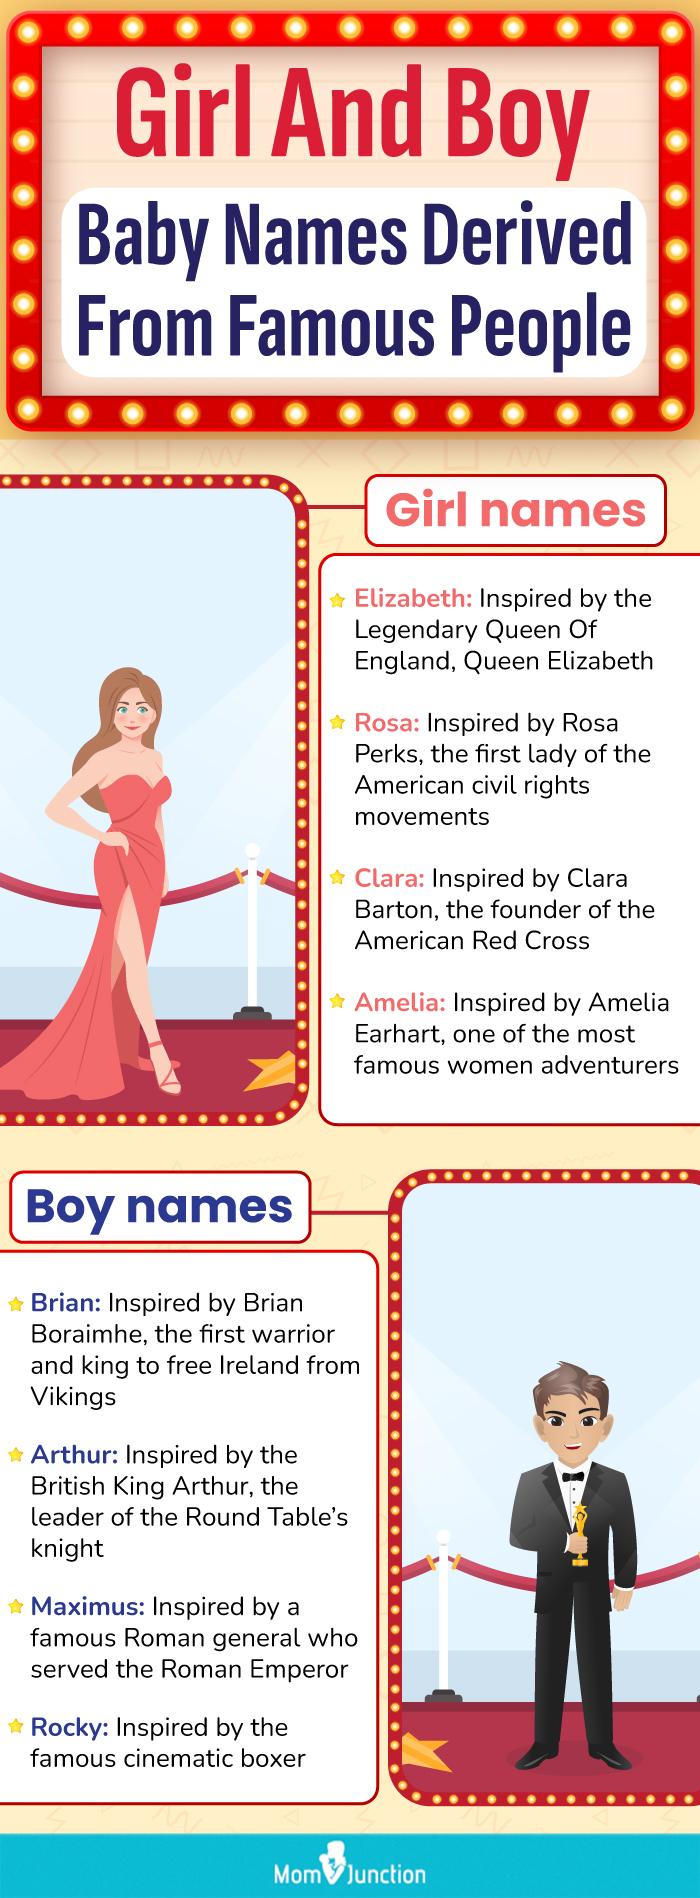 girl and boy baby names derived from famous people (infographic)